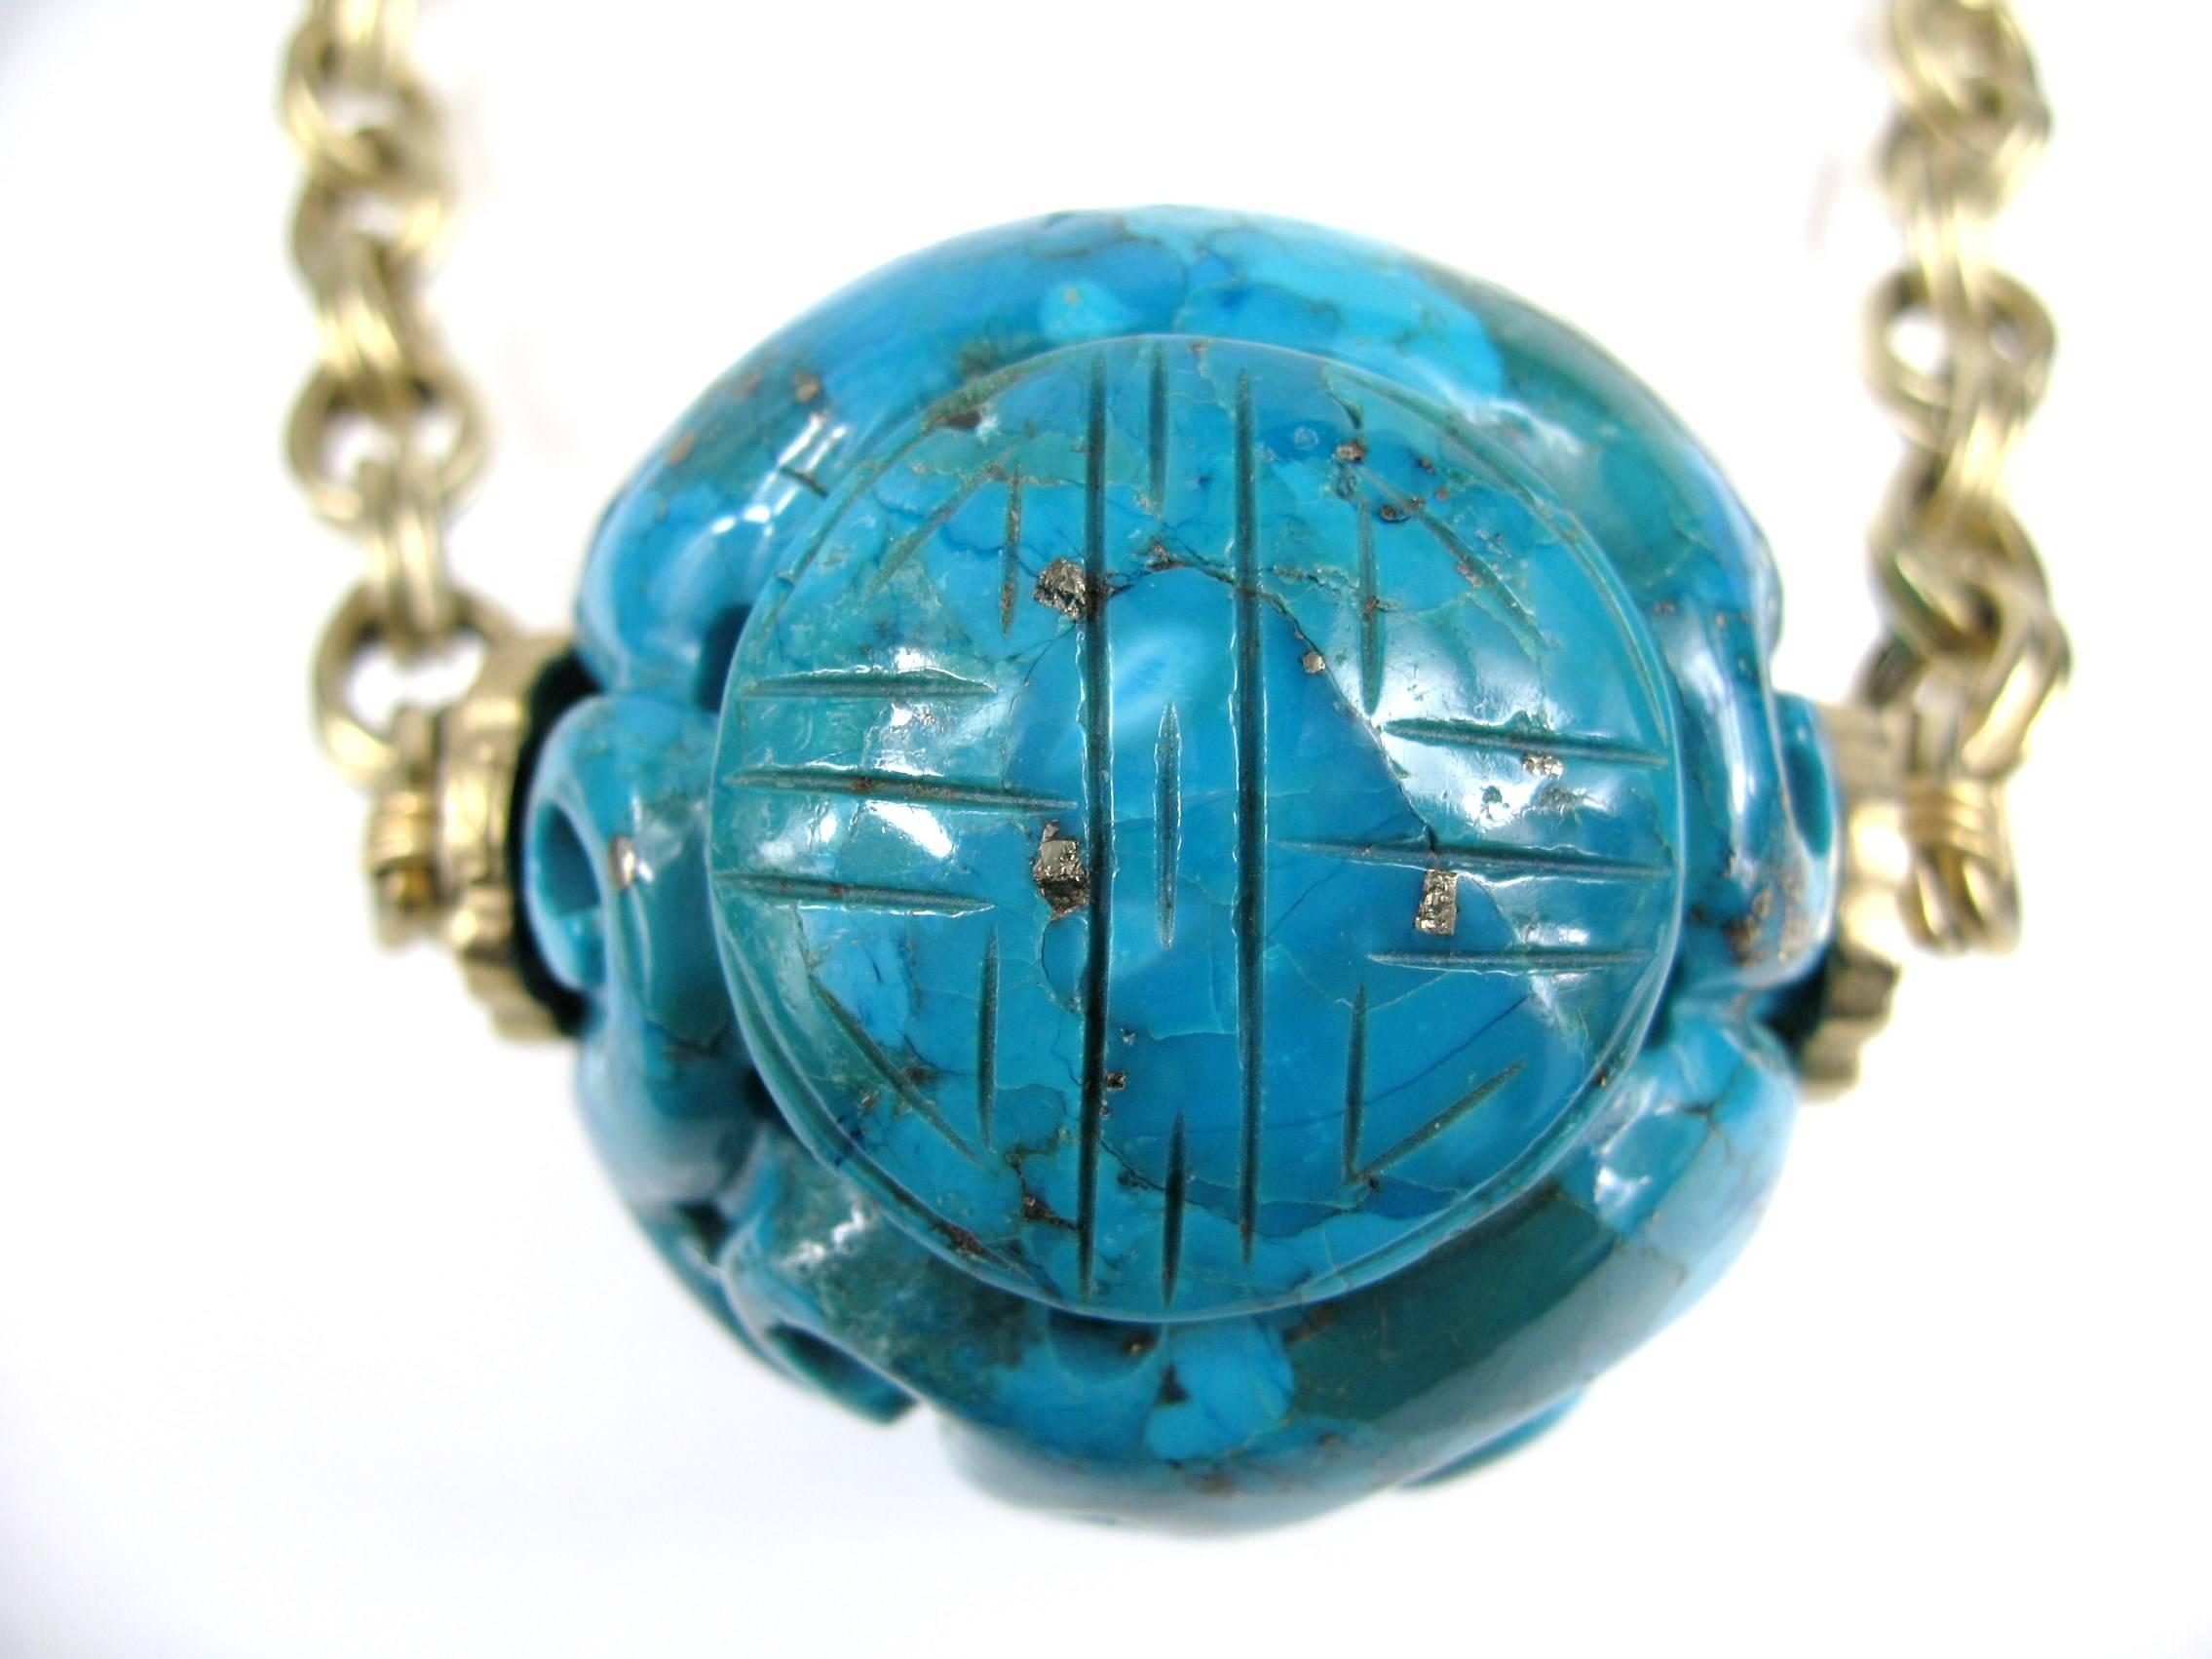 This is an incredible piece from the 1990's by Stephen Dweck. Stunning carved Turquoise Ball attached to a large gold washed sterling silver chain. The ball measures 52.59 mm or 2.07 inches. The chain is approximately 36 inches long, Turquoise Ball